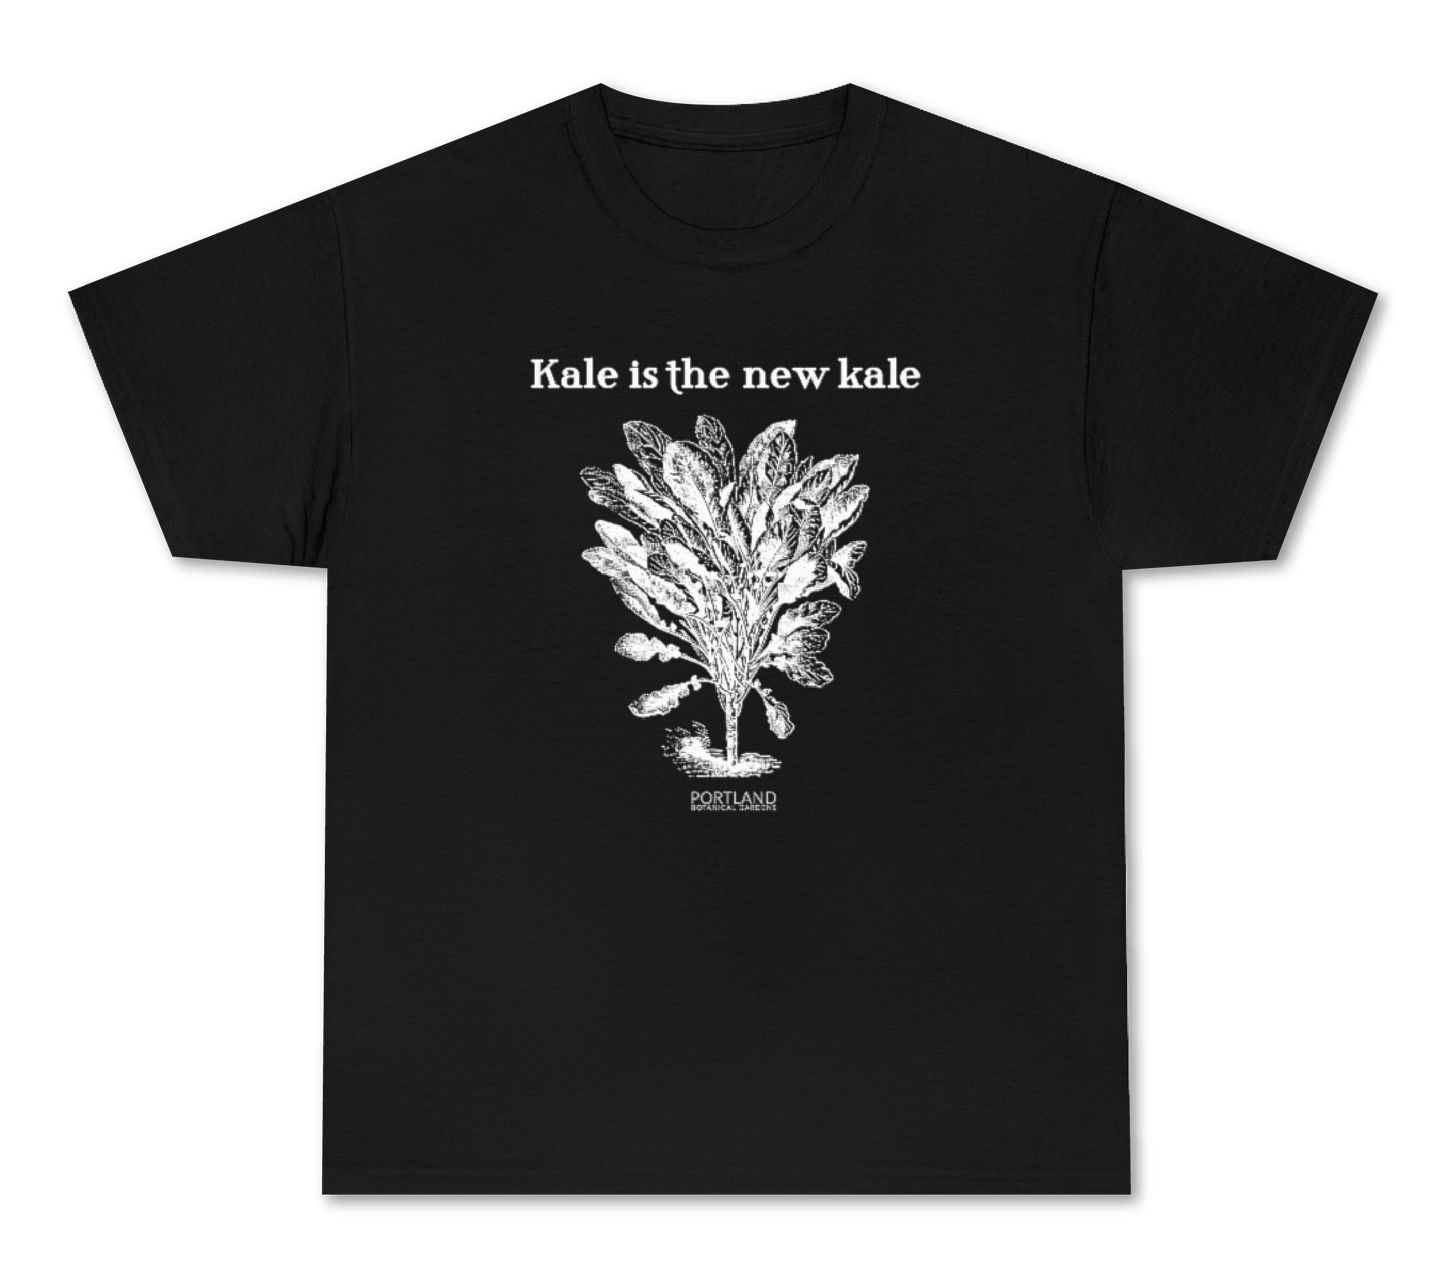 Kale is the New Kale - T-Shirt